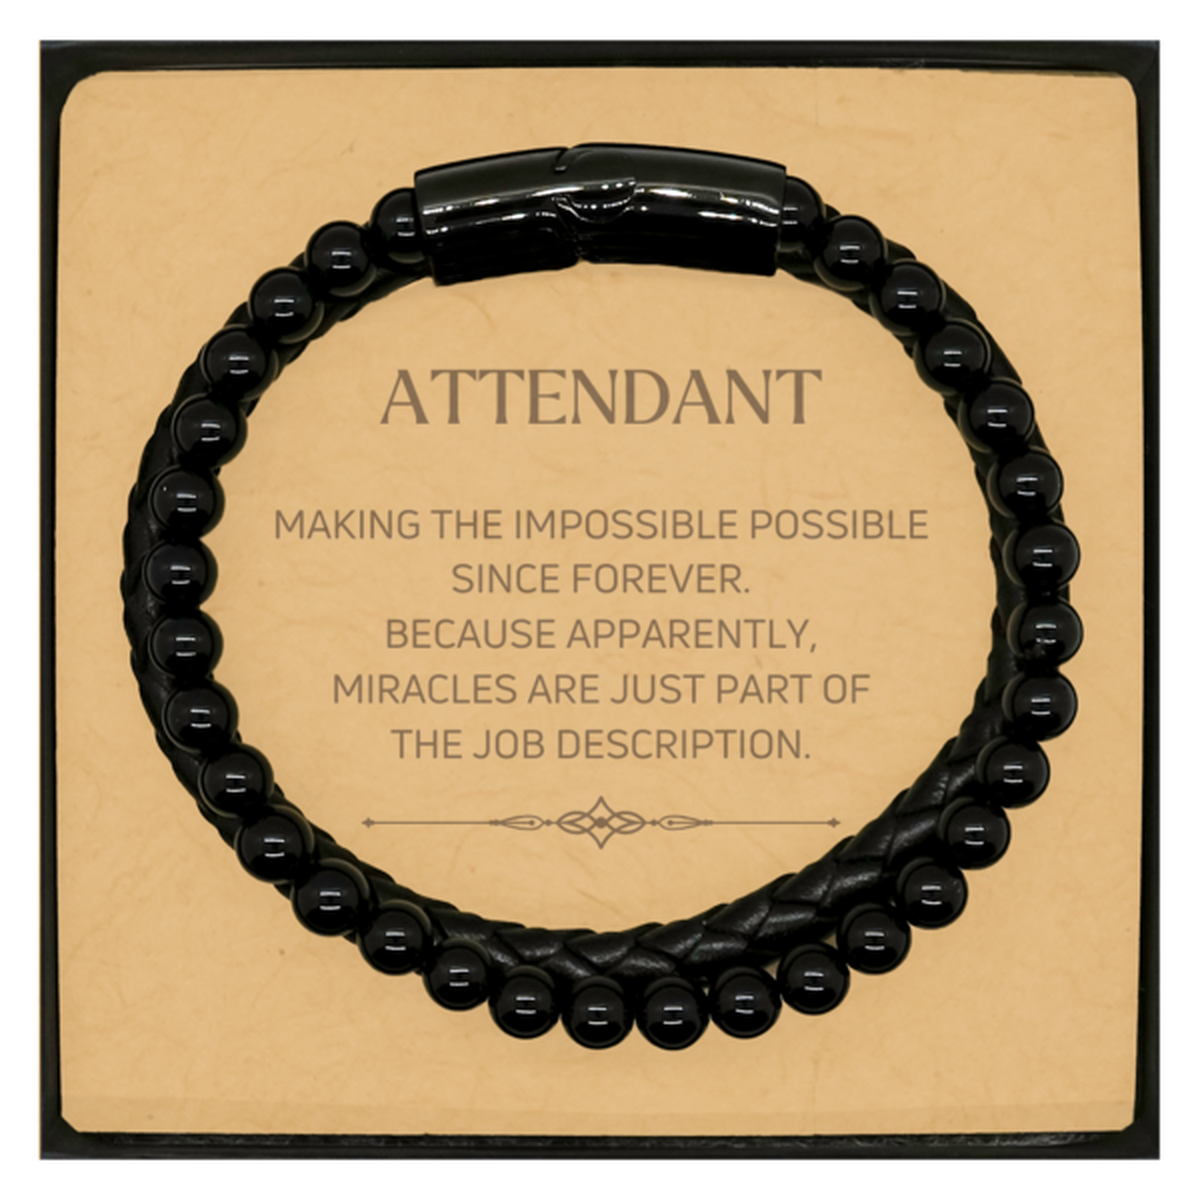 Funny Attendant Gifts, Miracles are just part of the job description, Inspirational Birthday Christmas Stone Leather Bracelets For Attendant, Men, Women, Coworkers, Friends, Boss